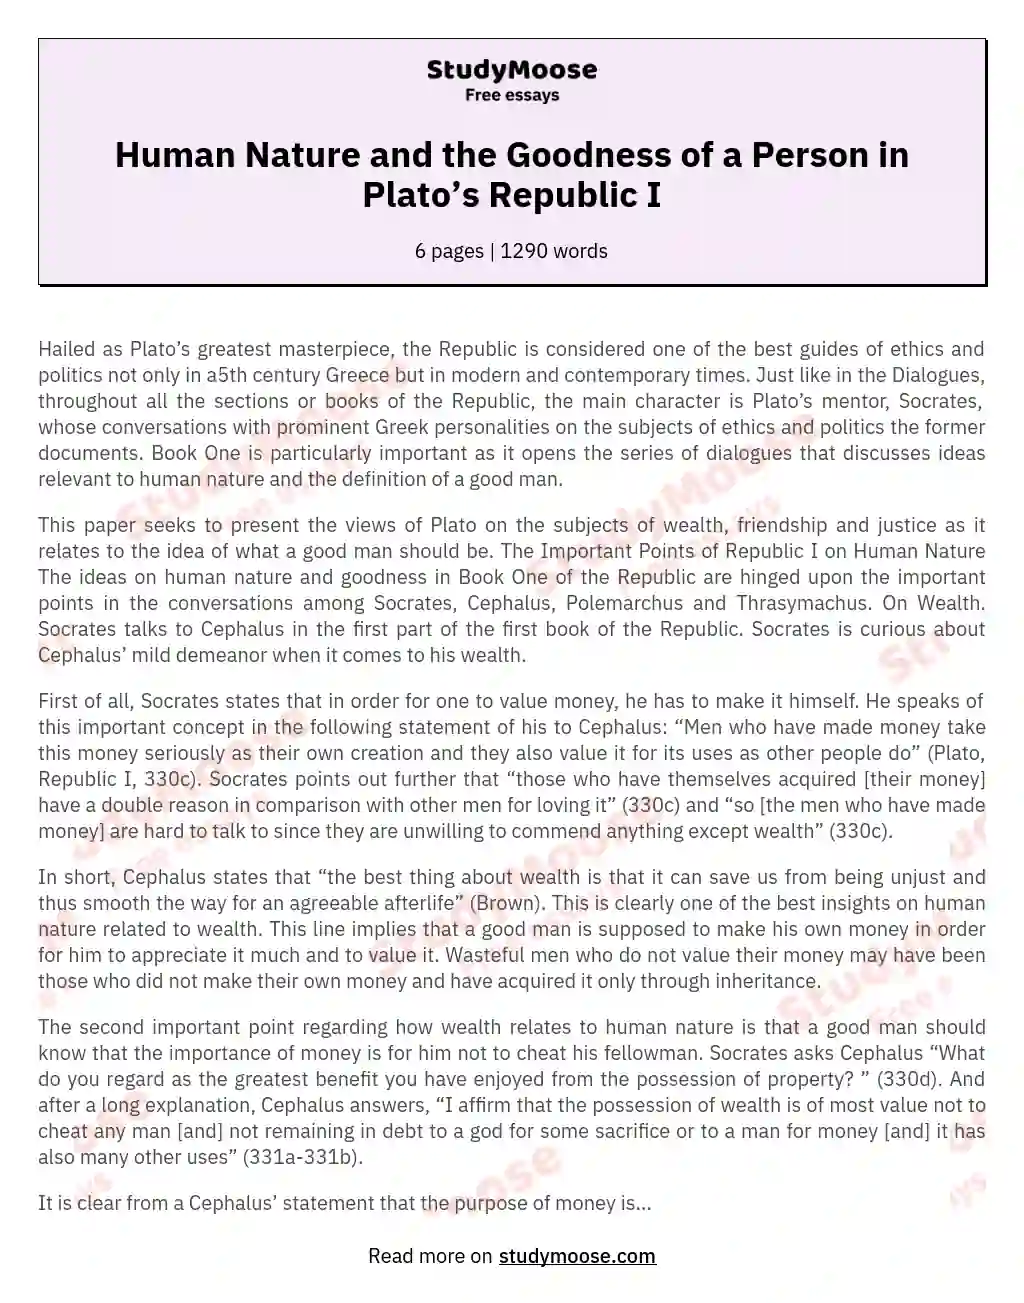 Human Nature and the Goodness of a Person in Plato’s Republic I